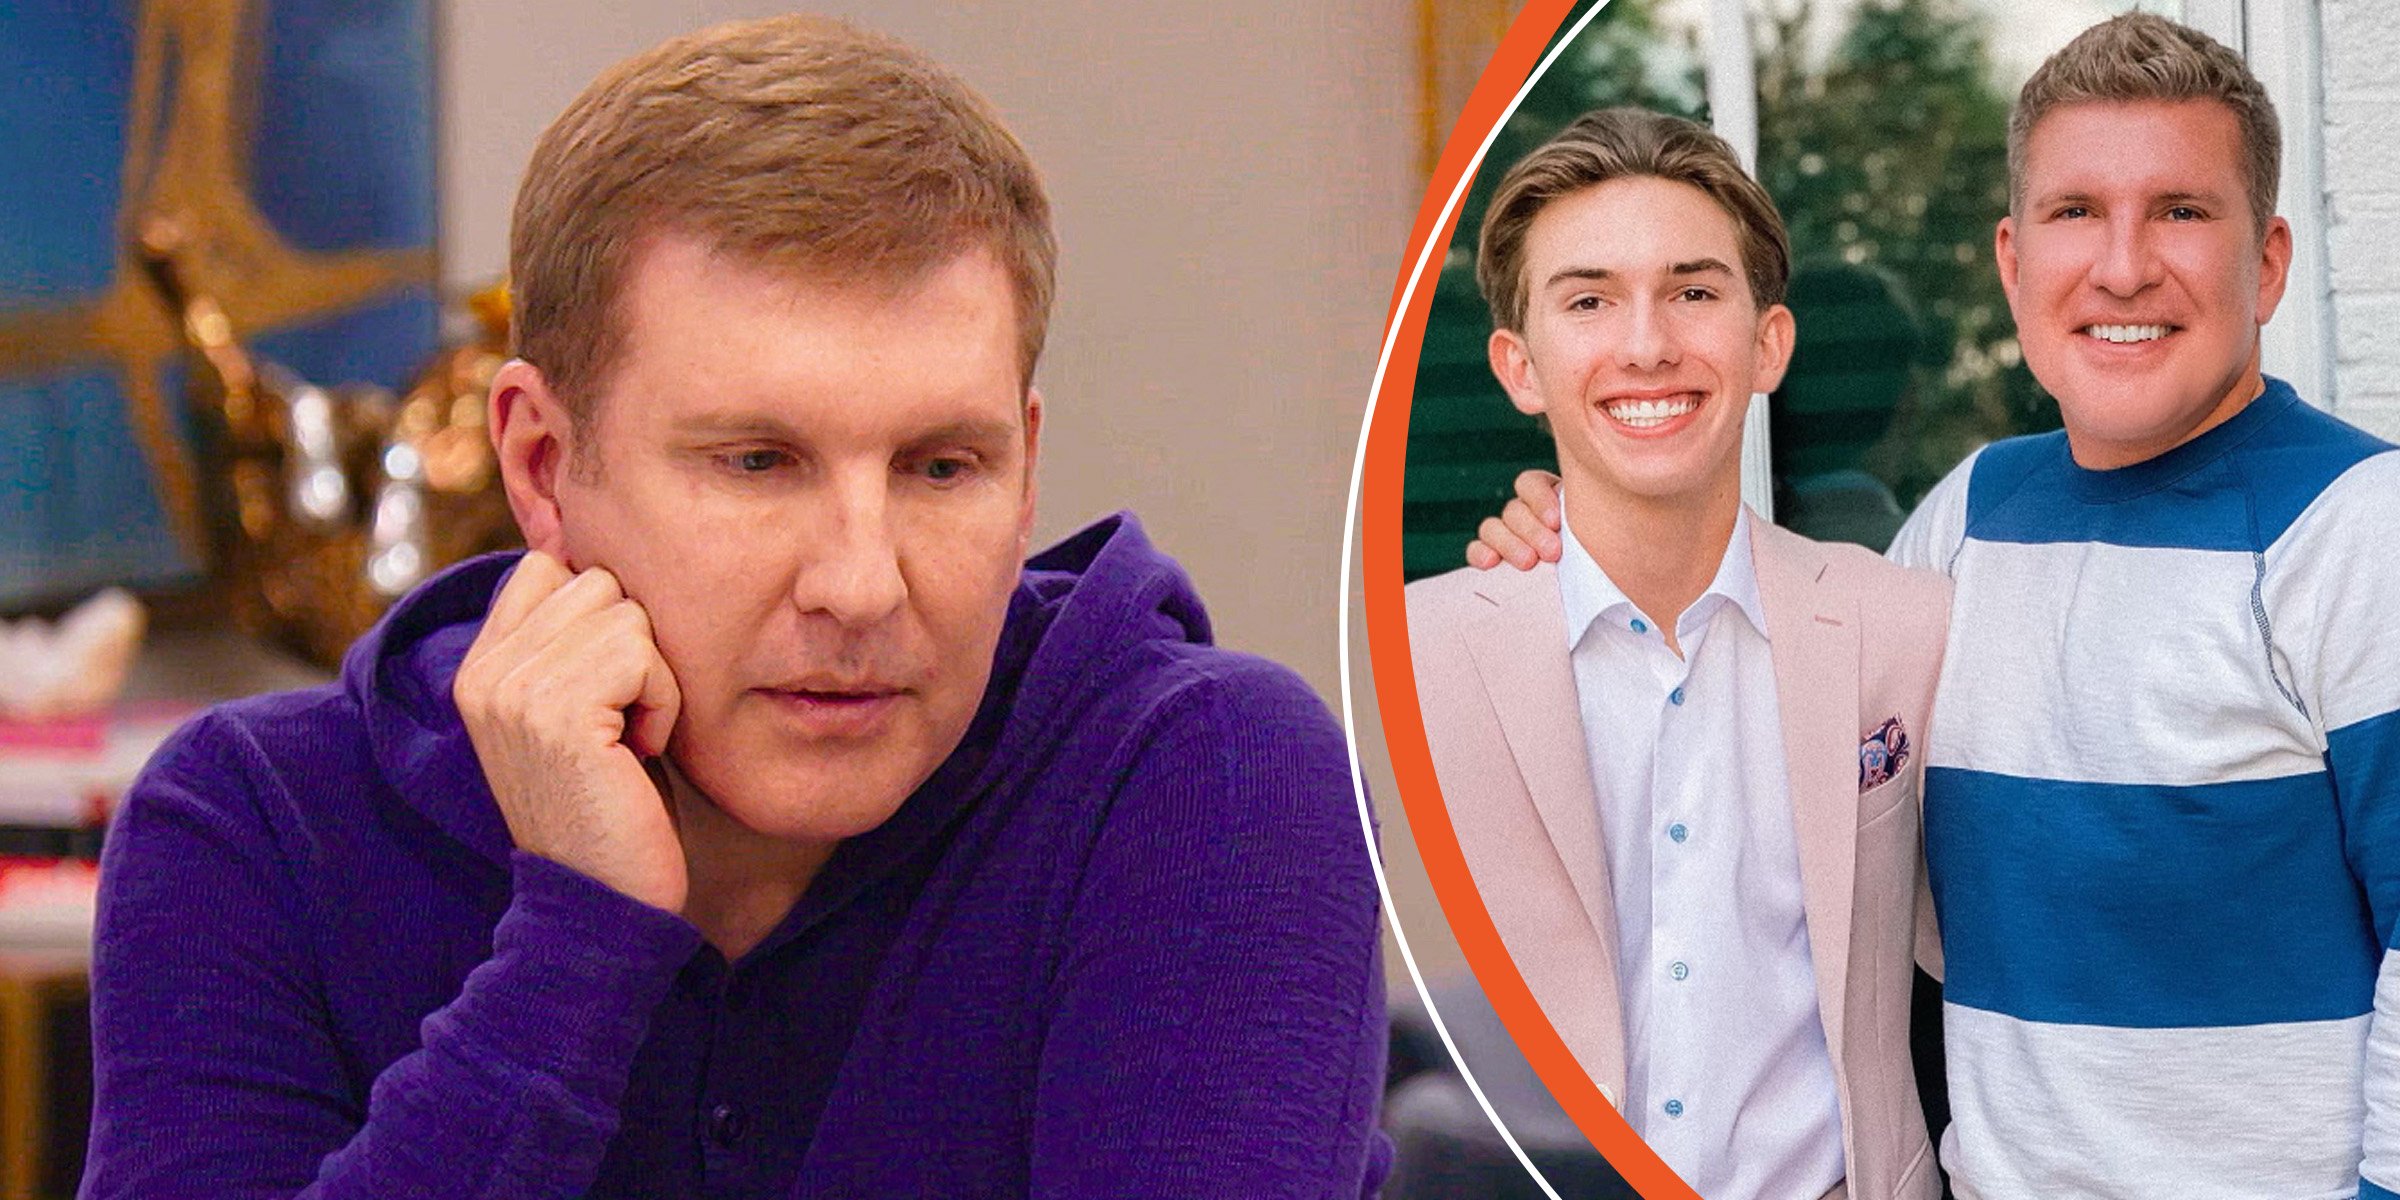 Todd Chrisley | Todd Chrisley and Grayson Chrisley | Source: https://www.instagram.com/toddchrisley/ Getty Images 